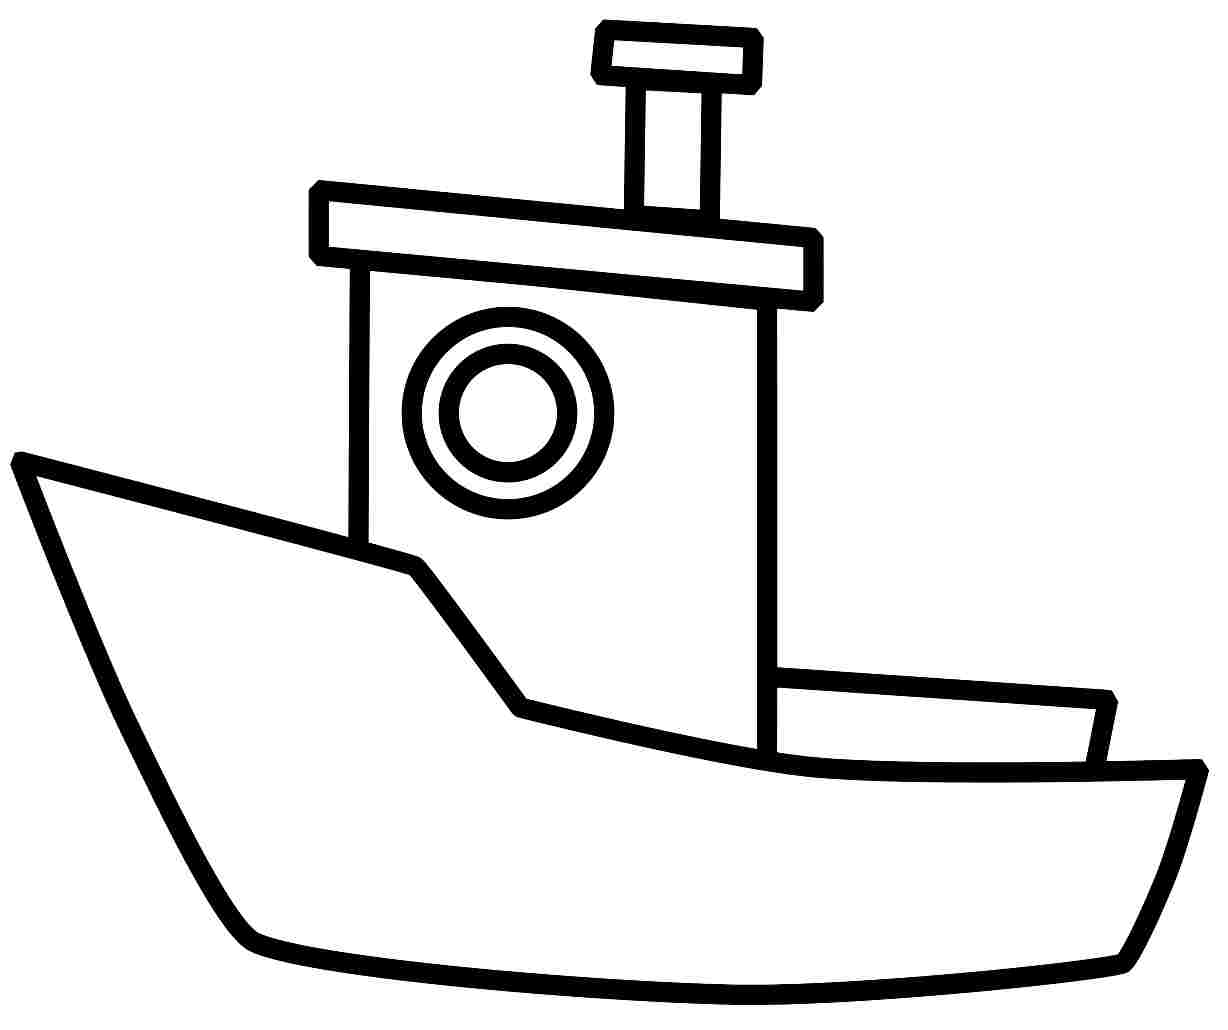 Boat coloring page 2,boat coloring pages - Prints and Colors